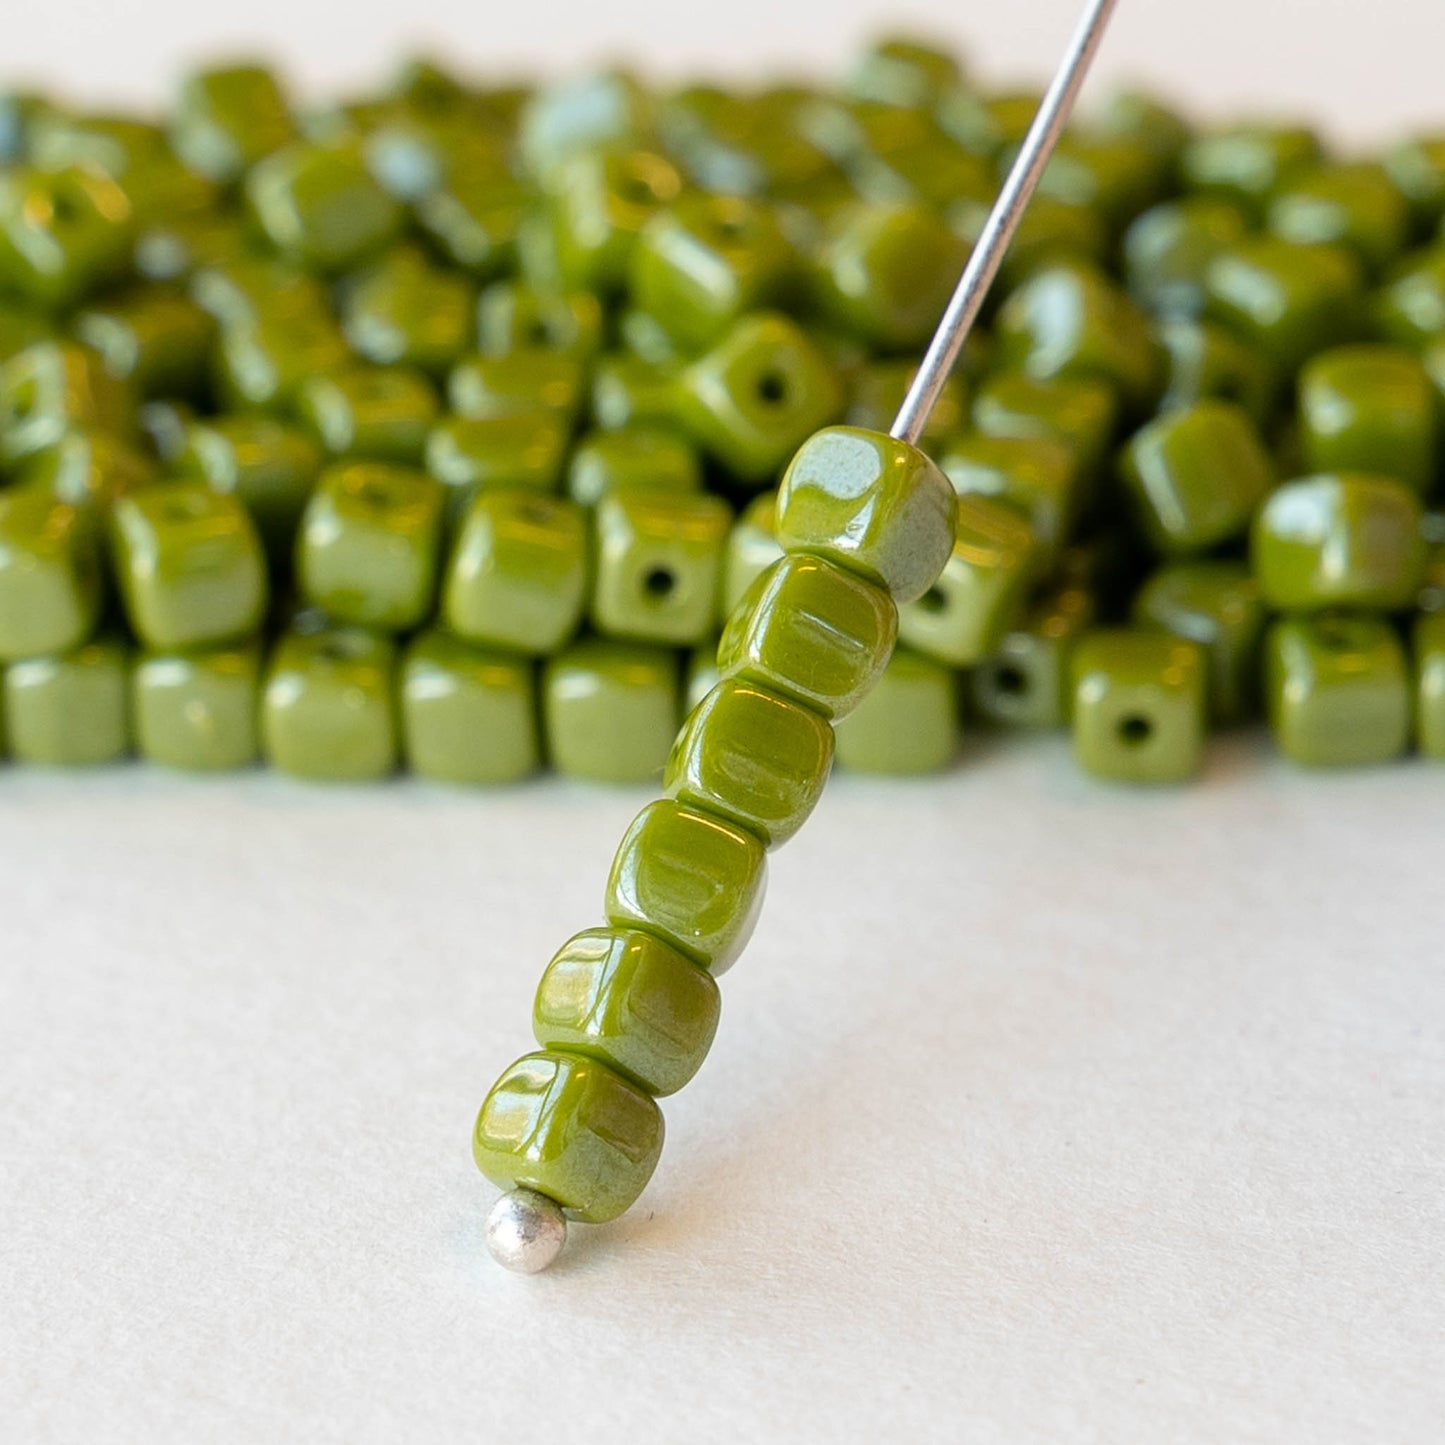 Load image into Gallery viewer, 4mm Glass Cube Beads - Olive Green Luster - 100 beads
